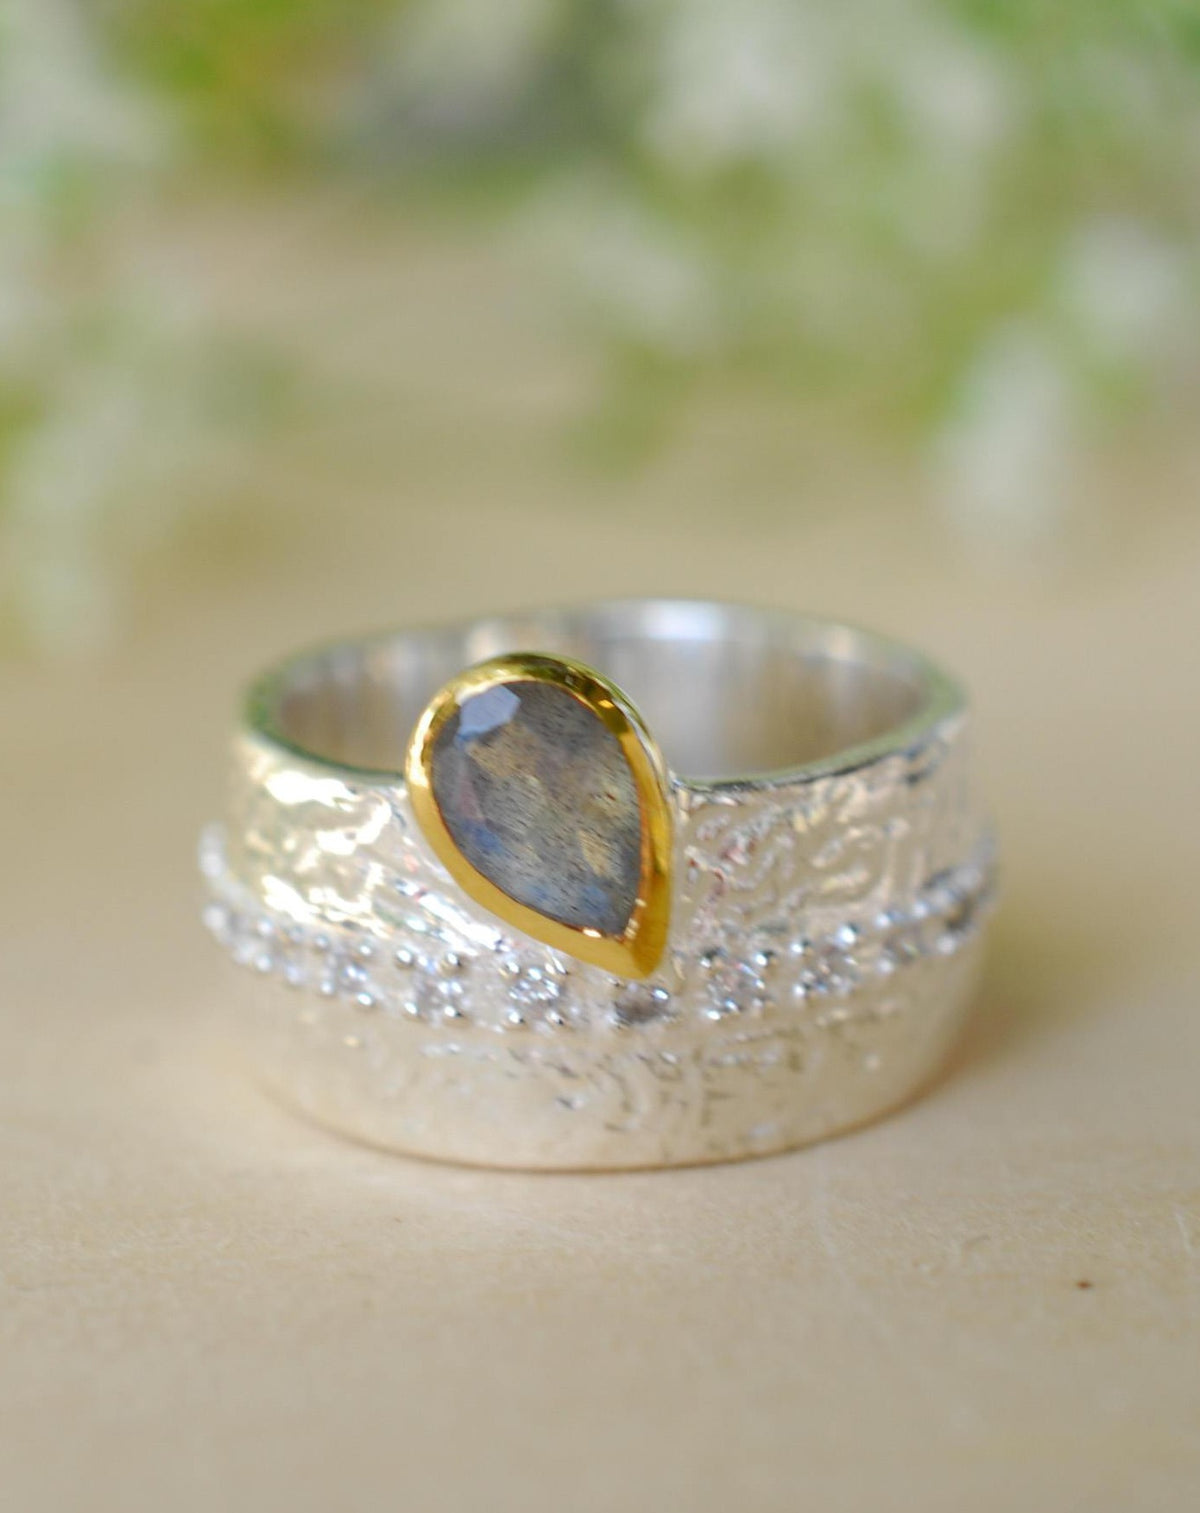 Rainbow Labradorite Ring * Sterling Silver 925 * Boho * Organic * Gold Vermeil * Mix metals* Gypsy * Hammered Band * Cubic Zirconia BJR201